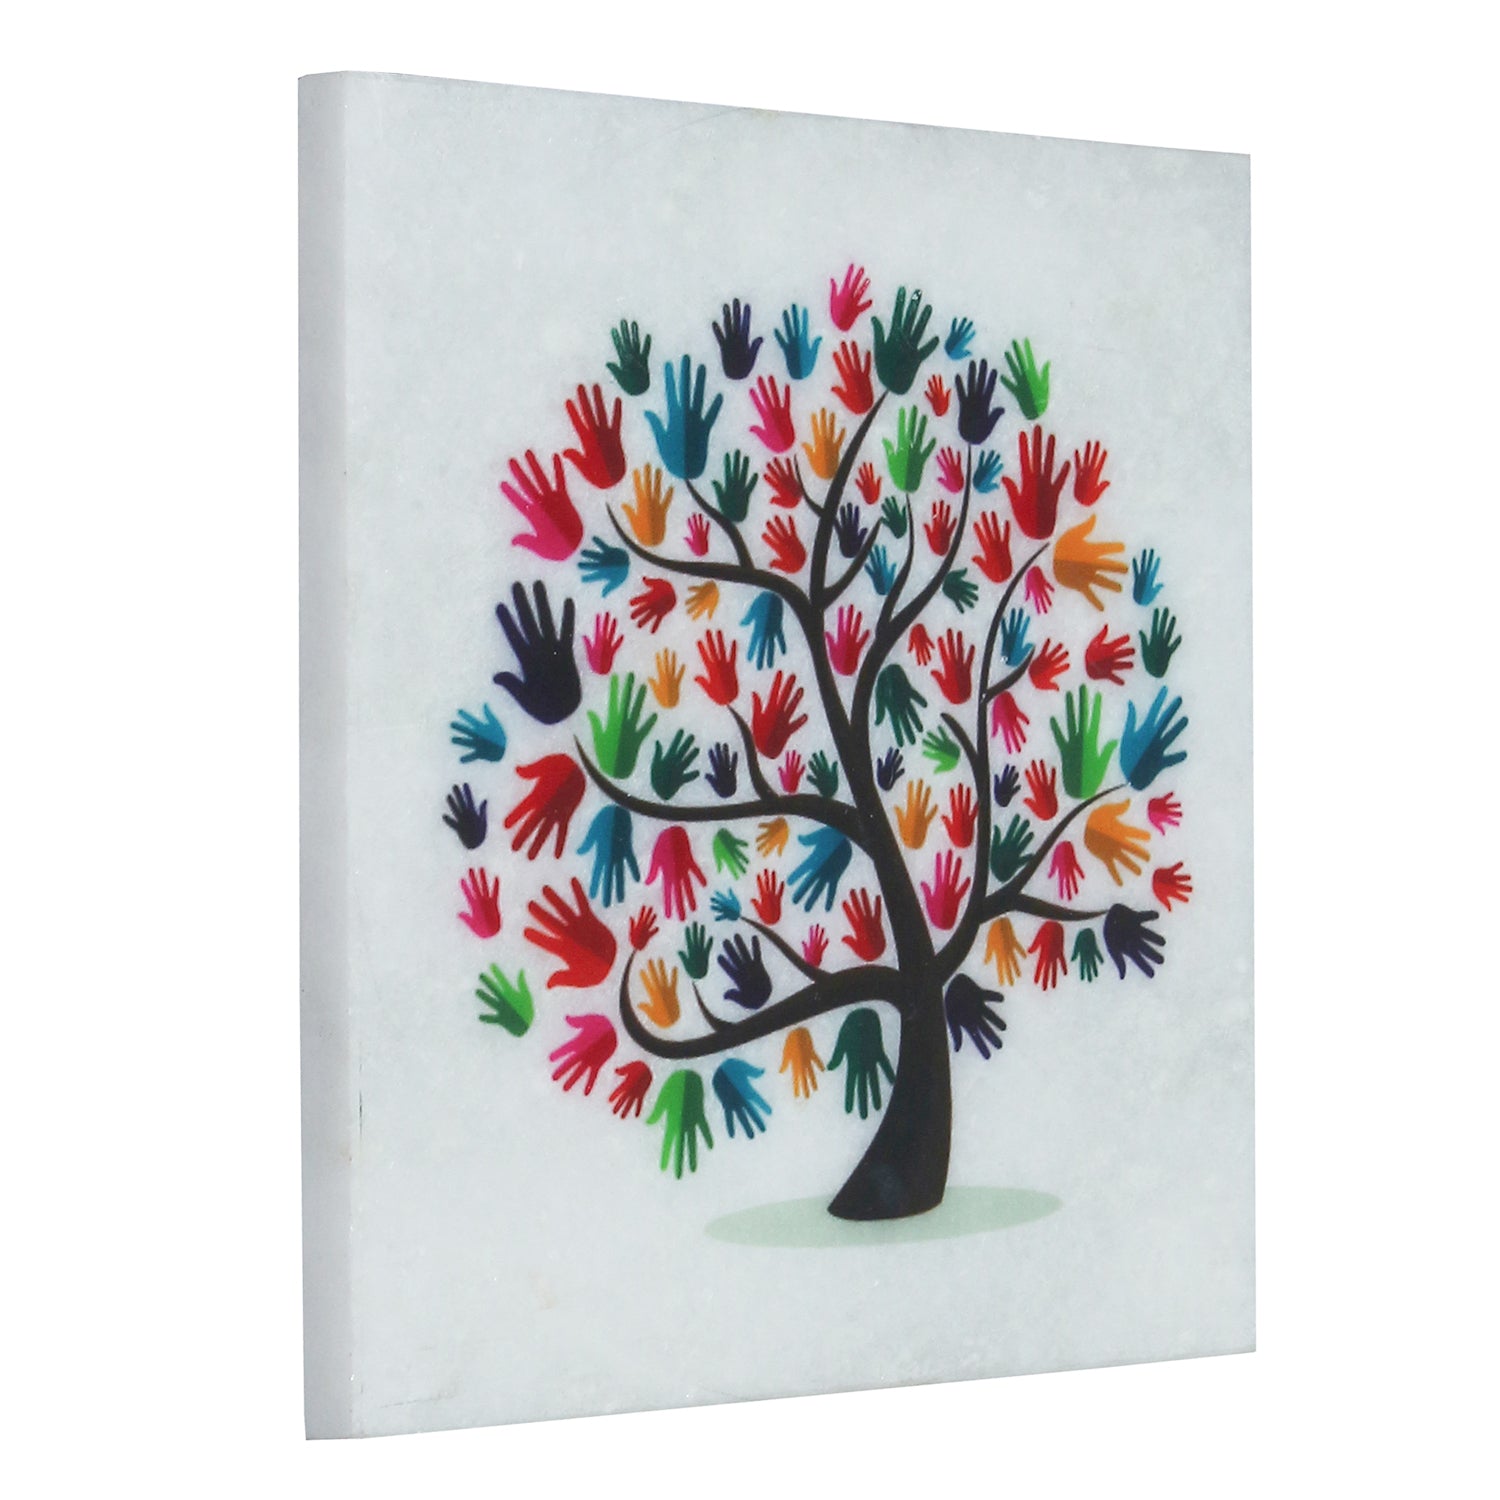 Colorful Hands Tree Painting On Marble Square Tile 4